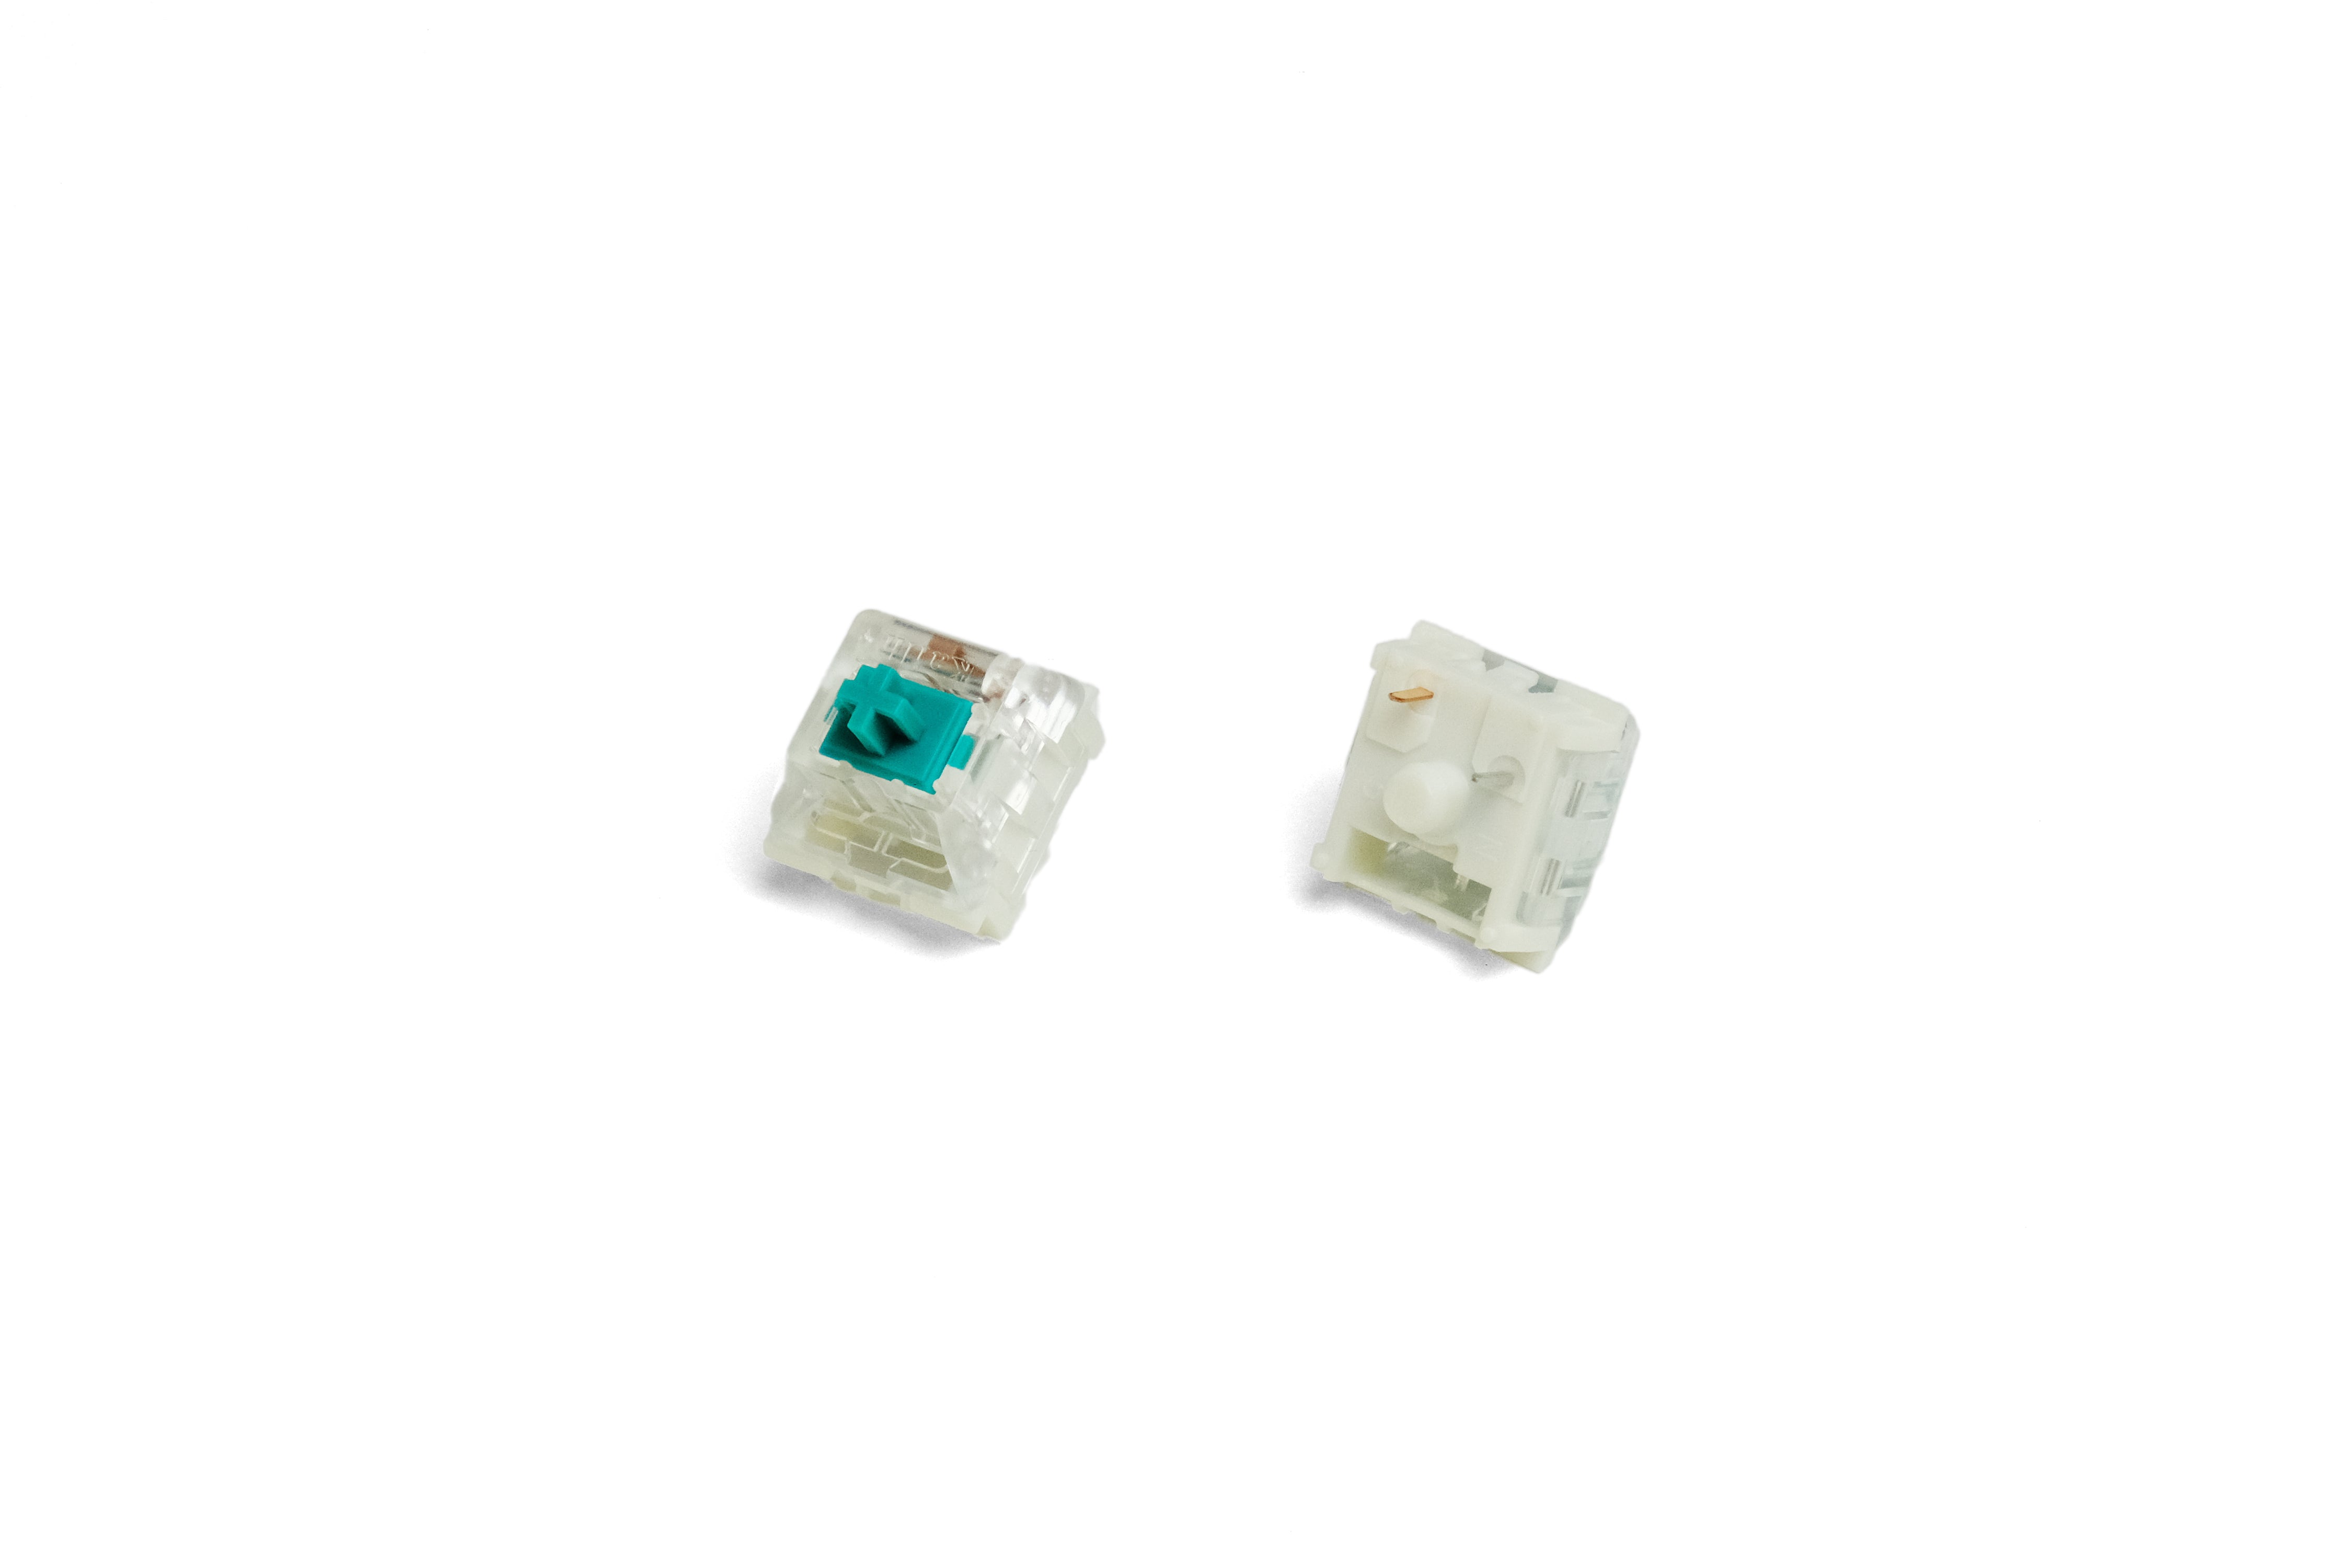 Kailh Pro Light Green Clicky Switches at KeebsForAll